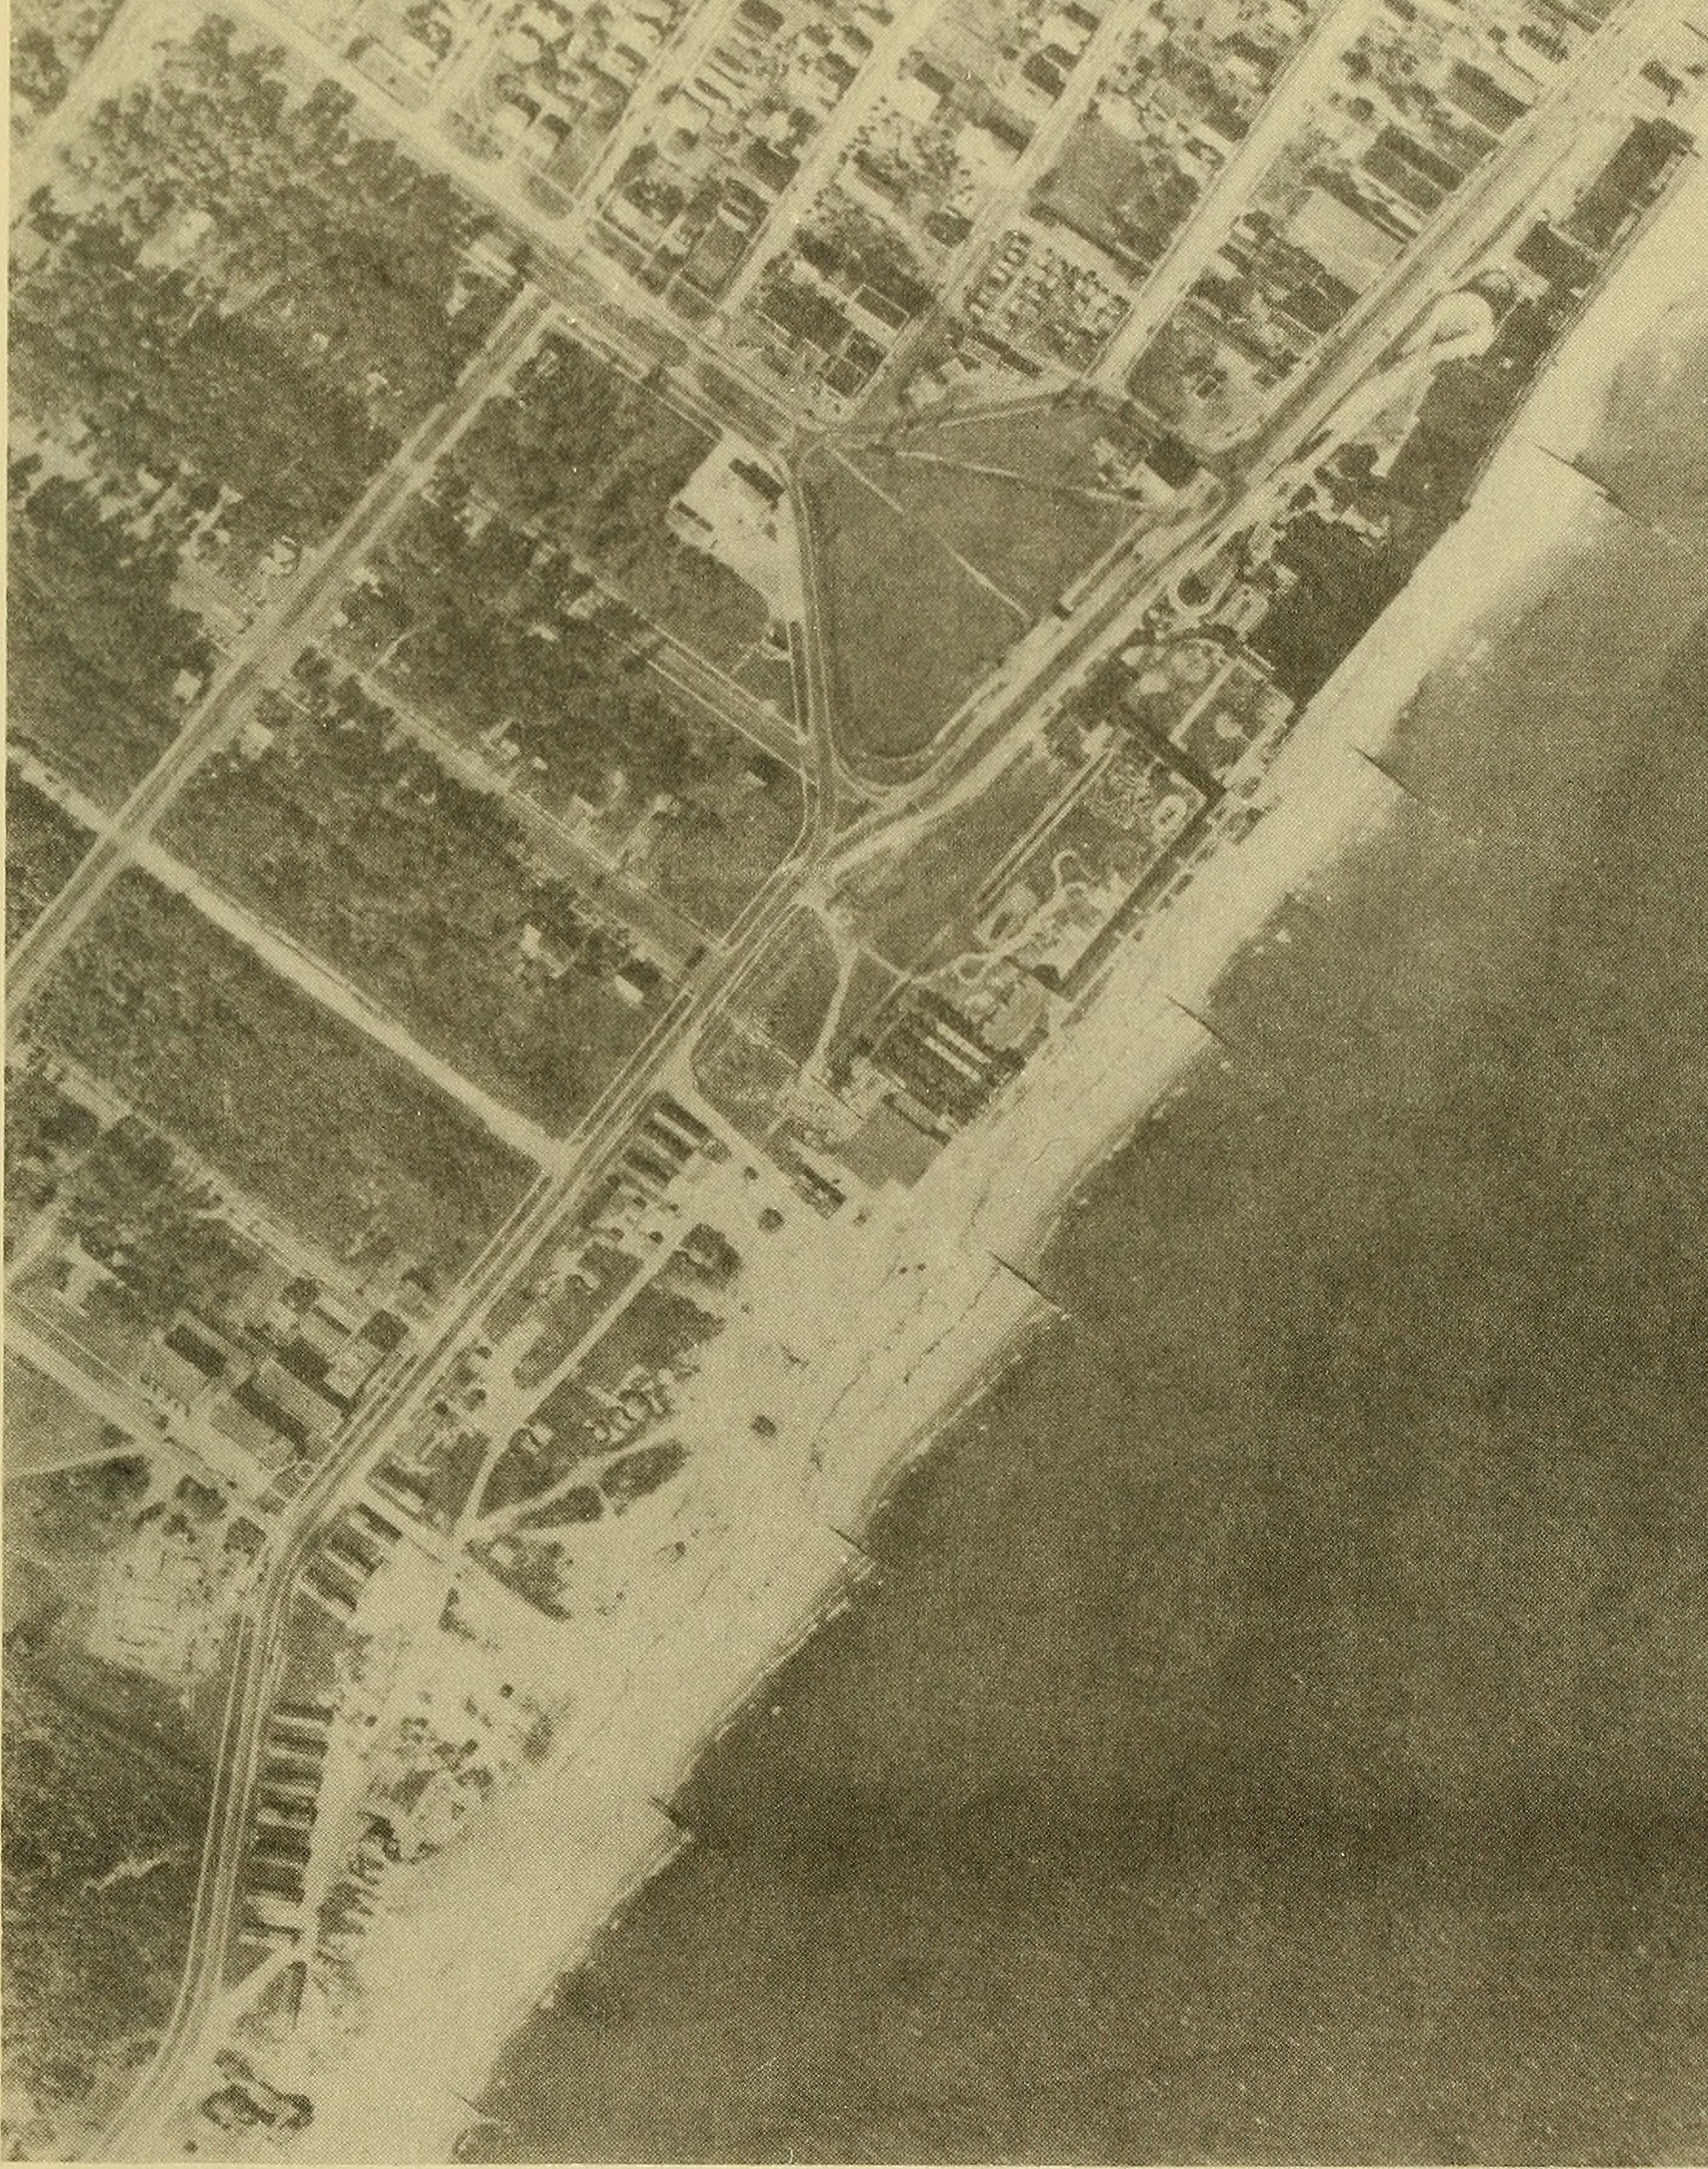 Black and white aerial photo of a series of parallel groins extending perpendicular outward from the shoreline with buildings visible on the mainland; sand is built up on beach on the left side of each groin and sand is eroded away from the beach on the right side of each groin.